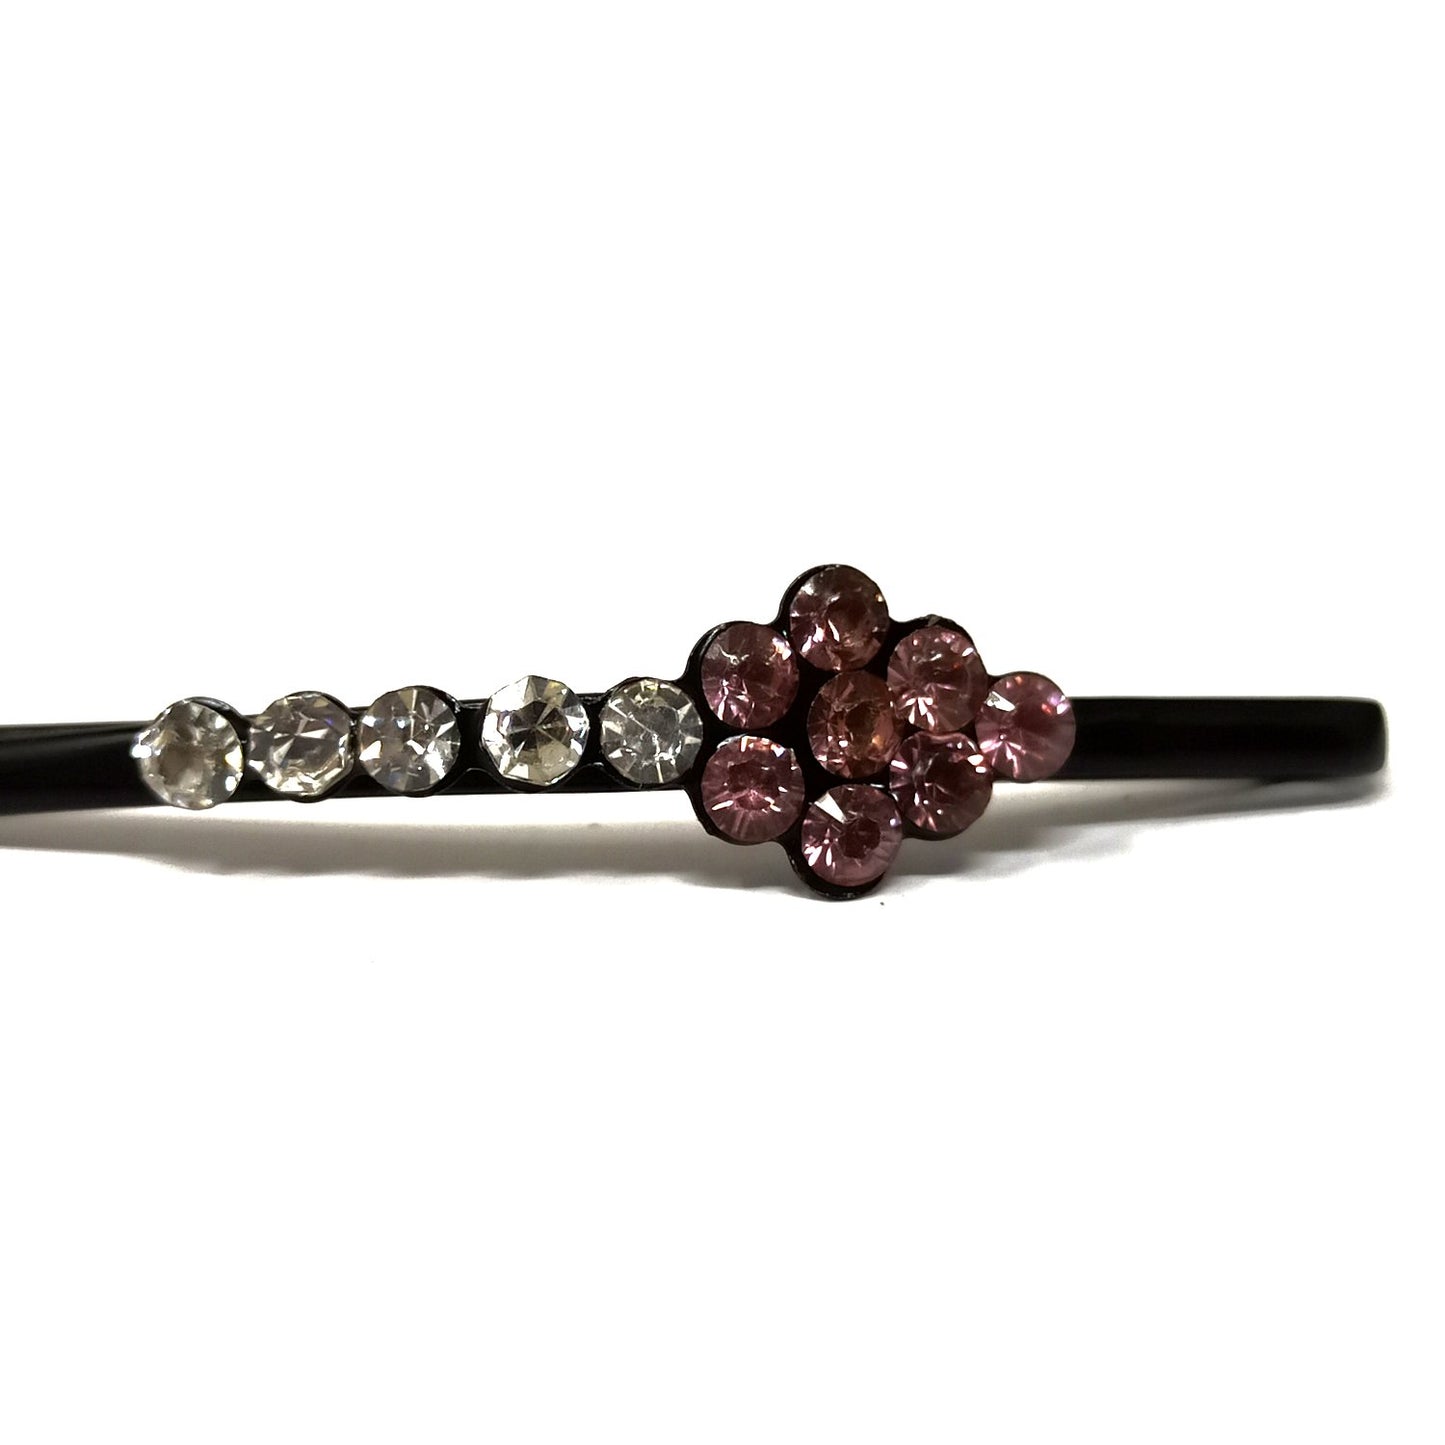 Anokhi Ada Fancy Bobby Pin for Girls and Women for Occasion (BE-40)